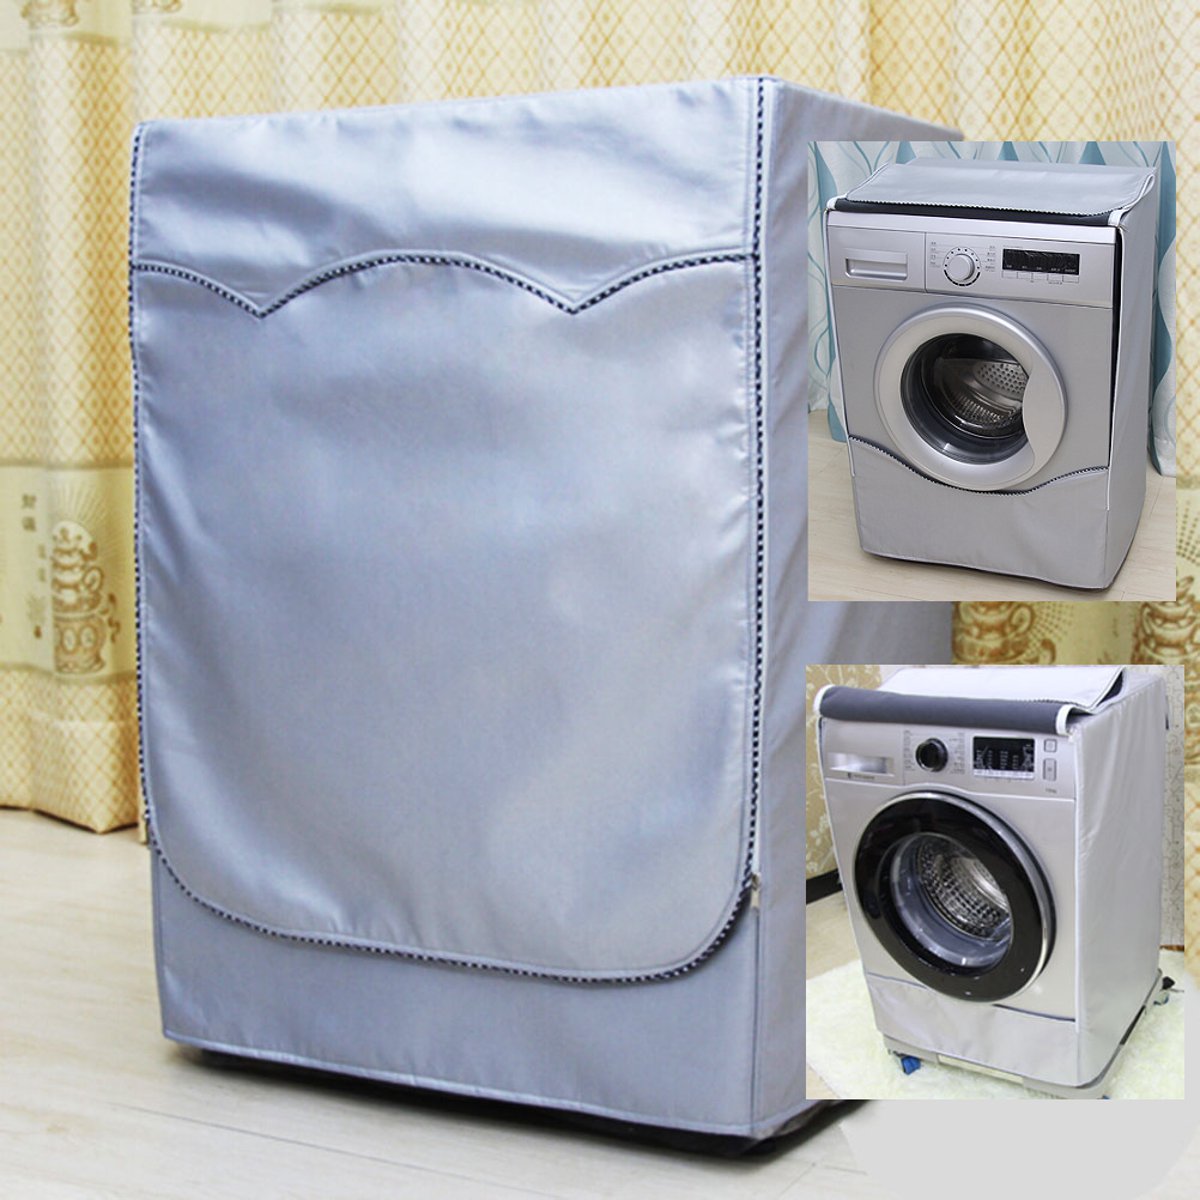 Fully Automatic Roller Washer Sunscreen Washing Machine Waterproof Cover Dryer Silver Dustproof Washing Machine Cover S/M/L/XL